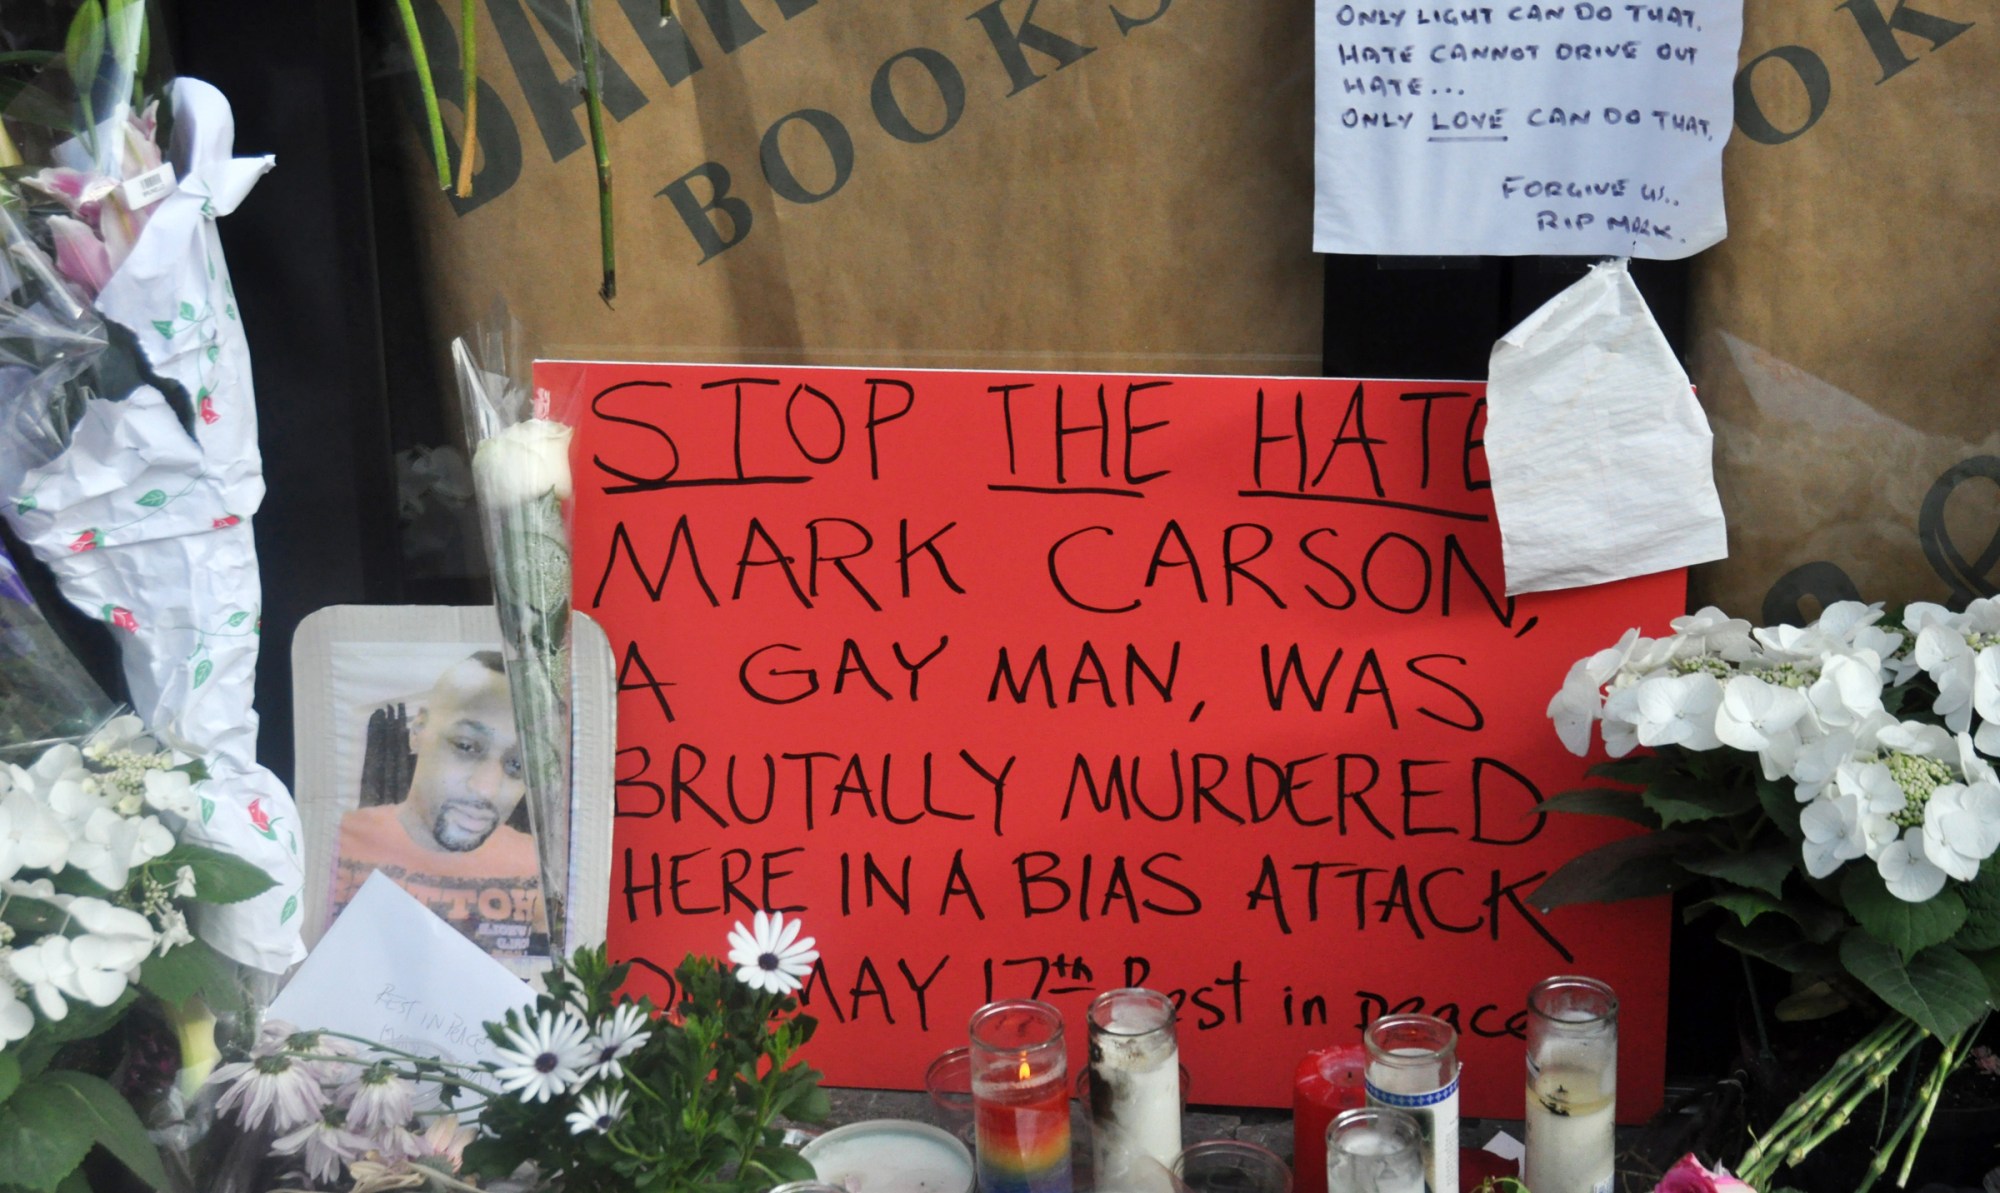 Several thousand people marched through Greenwich Village in May to protest the murder of Mark Carson, who was targeted for identifying as gay. (Flickr/Michael Fleshman)